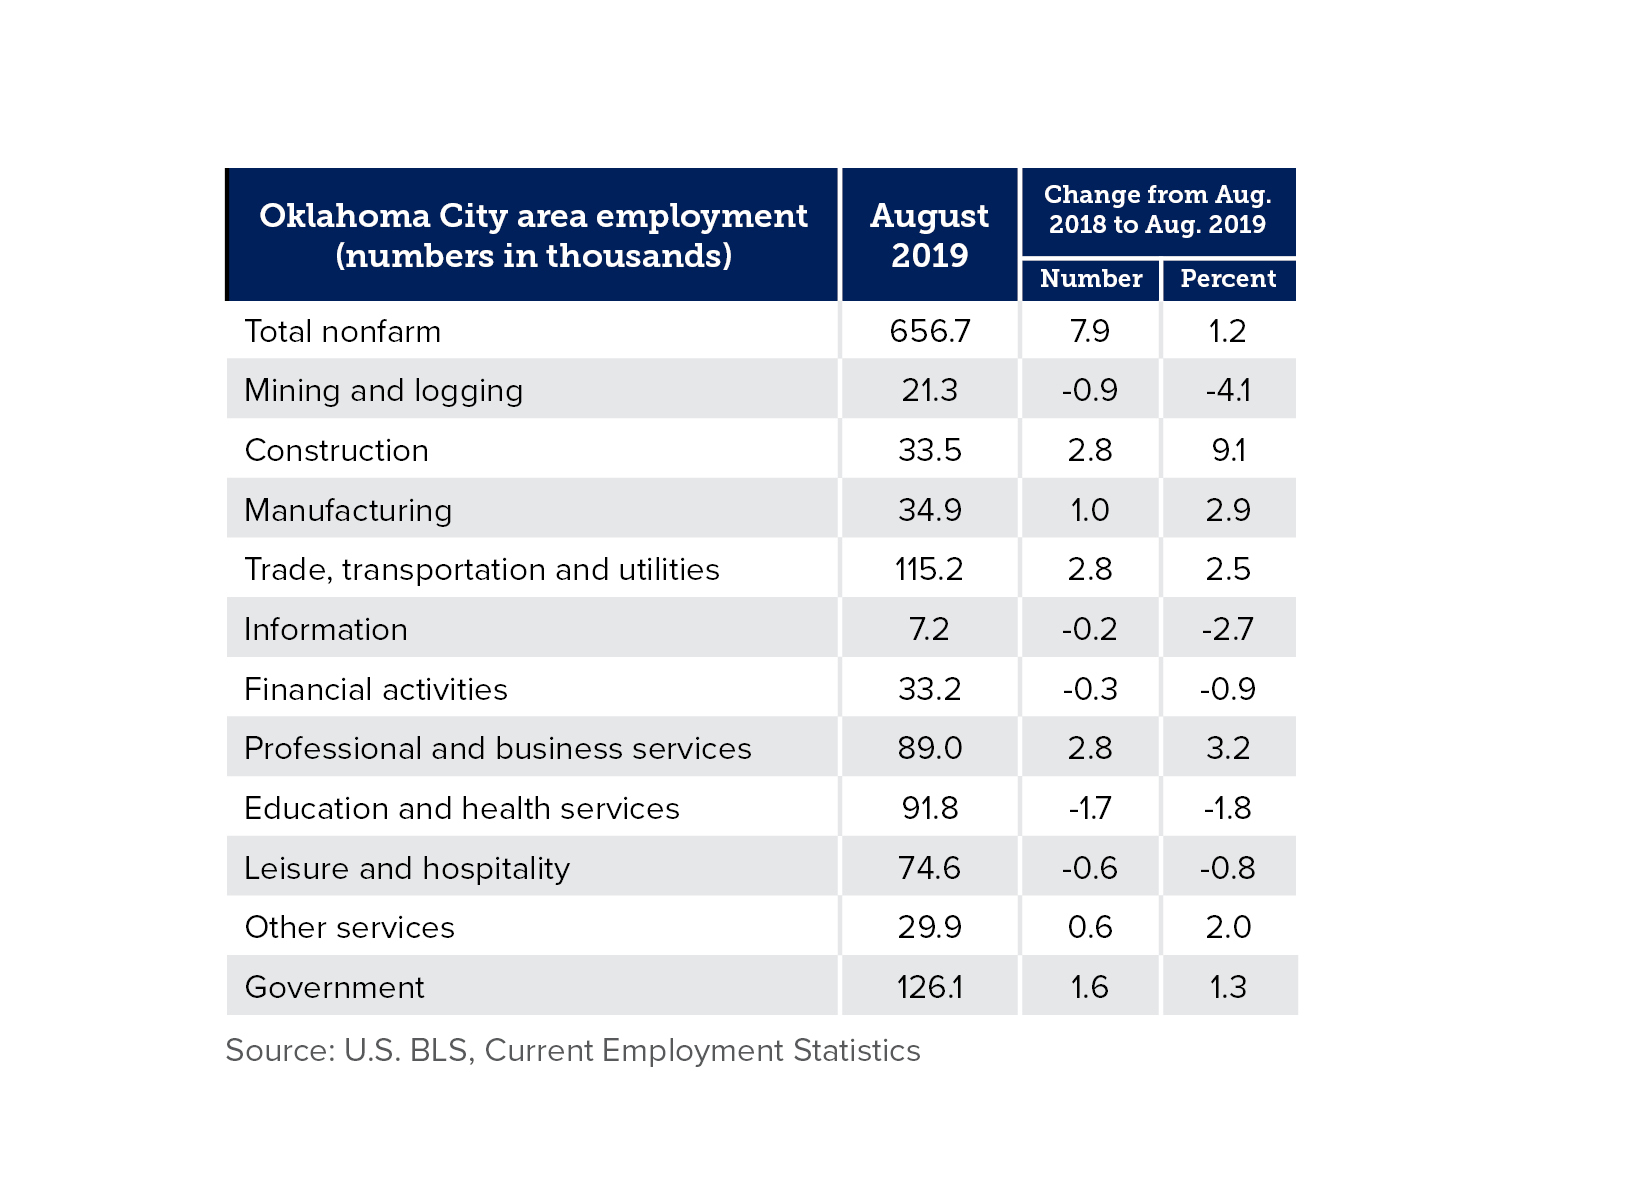 Chart defining Oklahoma City area employment by industry in August 2019